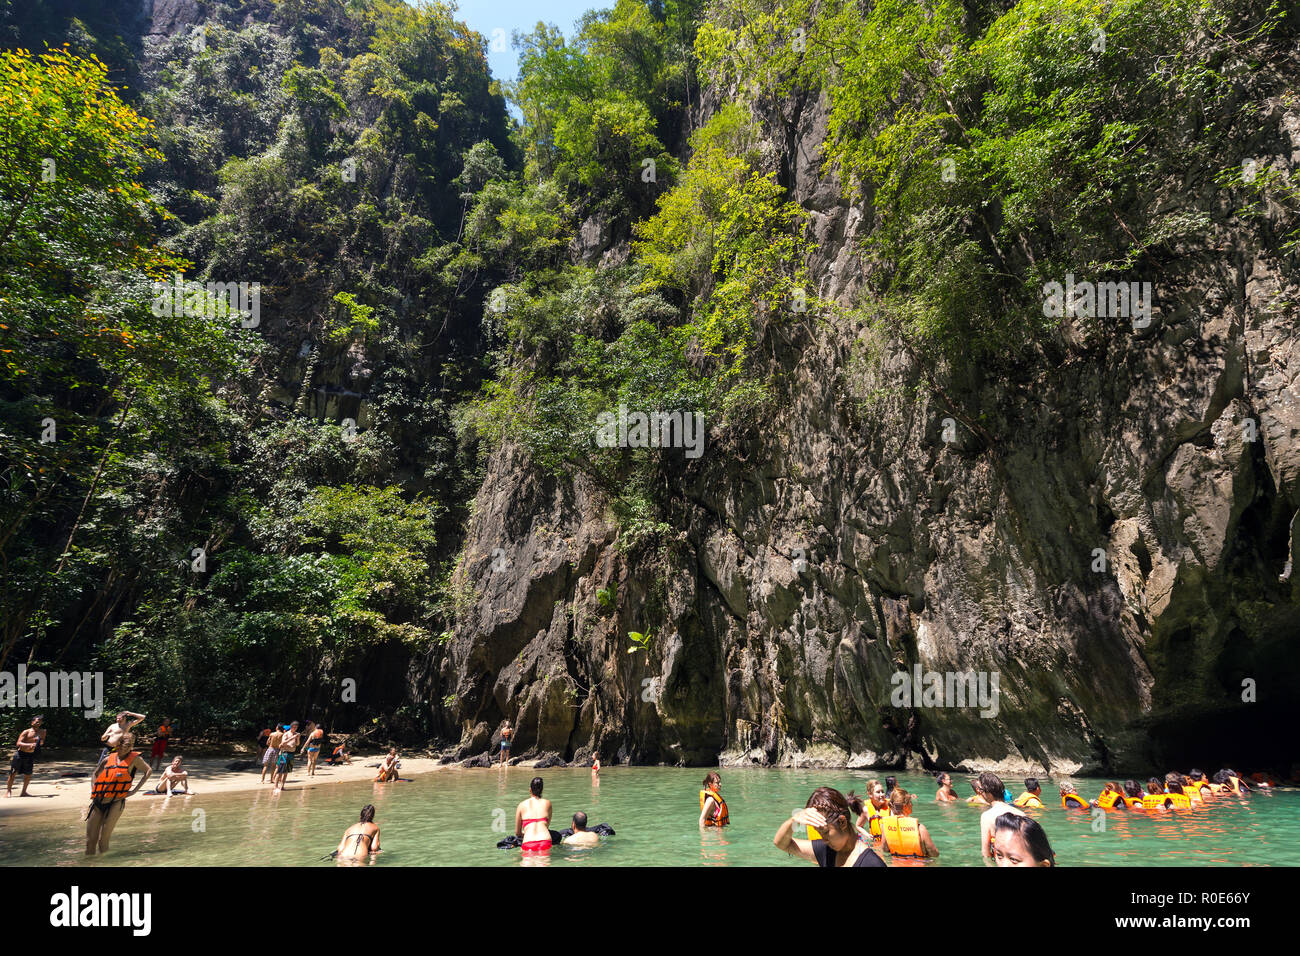 KO LANTA, THAILAND, FEBRUARY 09, 2015 : Some tourists are bathing in the natural sea pool of the Emerald cave near the Ko Lanta island in Thailand Stock Photo